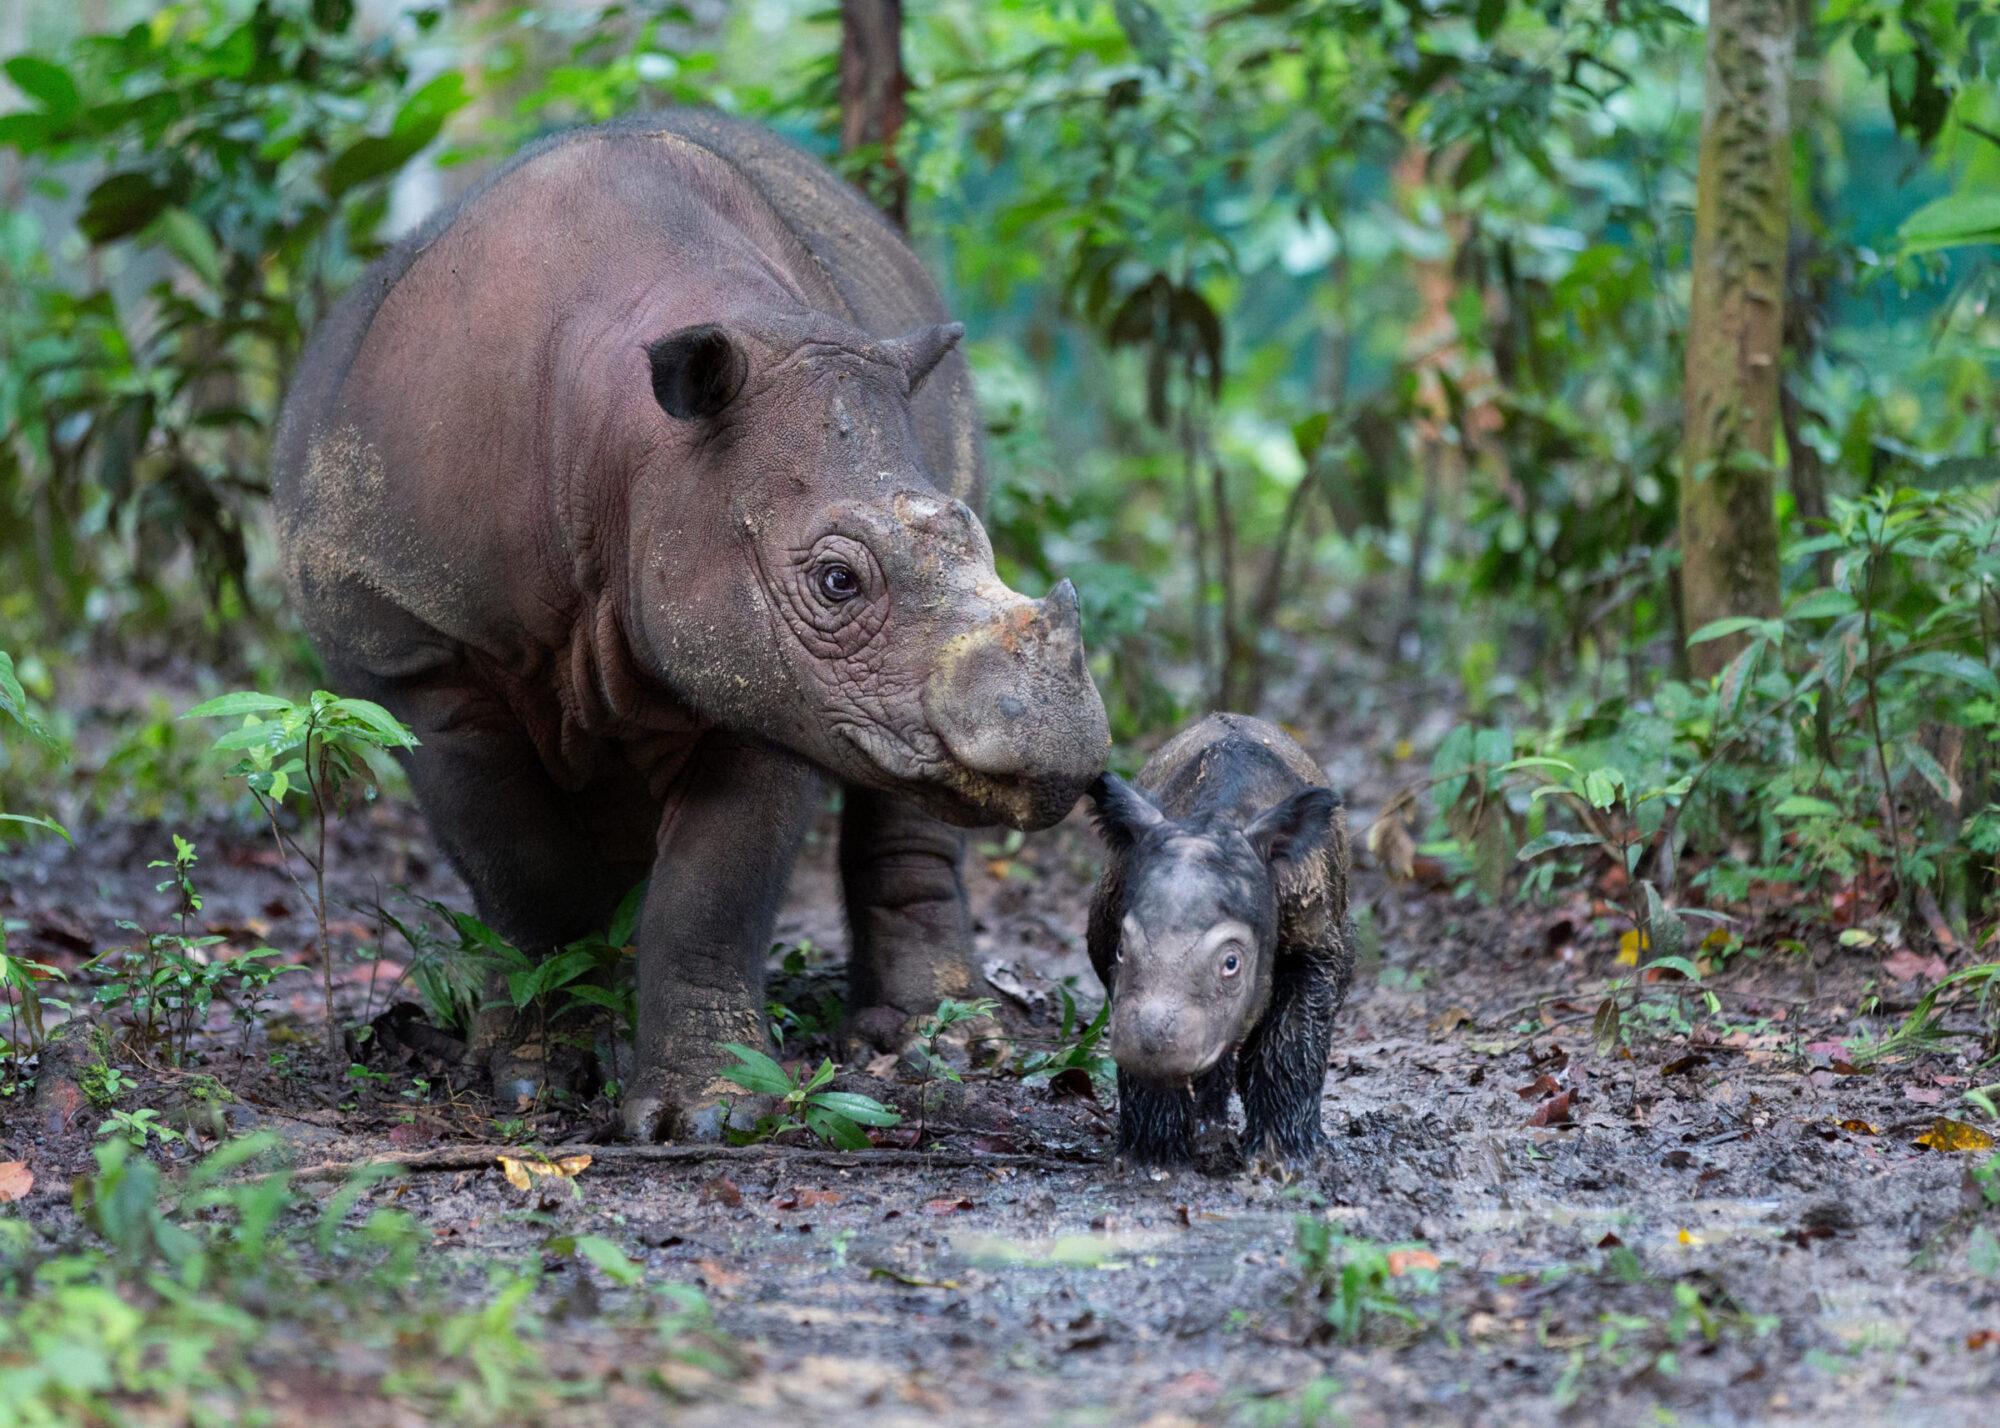 <p>A Sumatran rhinoceros and her newborn calf. There is disagreement among experts on whether the COP15 deal will be enough to reverse global nature loss (Image: Stephen Belcher / Alamy)</p>